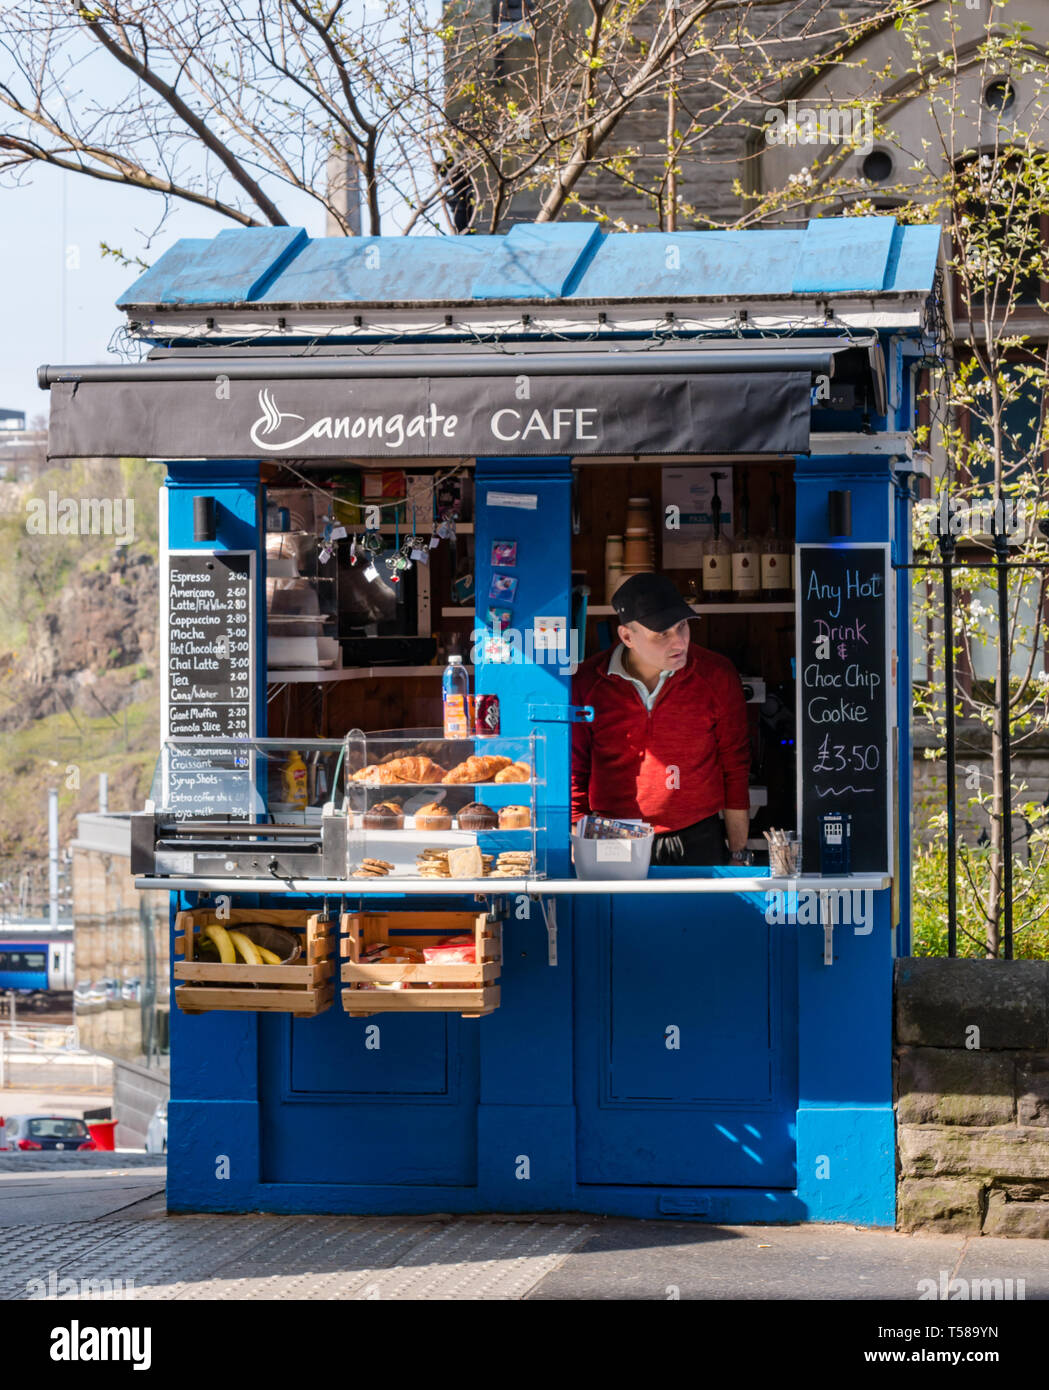 Old police call box converted to coffee takeaway stall, Canongate Cafe, Royal Mile, Edinburgh, Scotland, UK with proprietor looking for customers Stock Photo